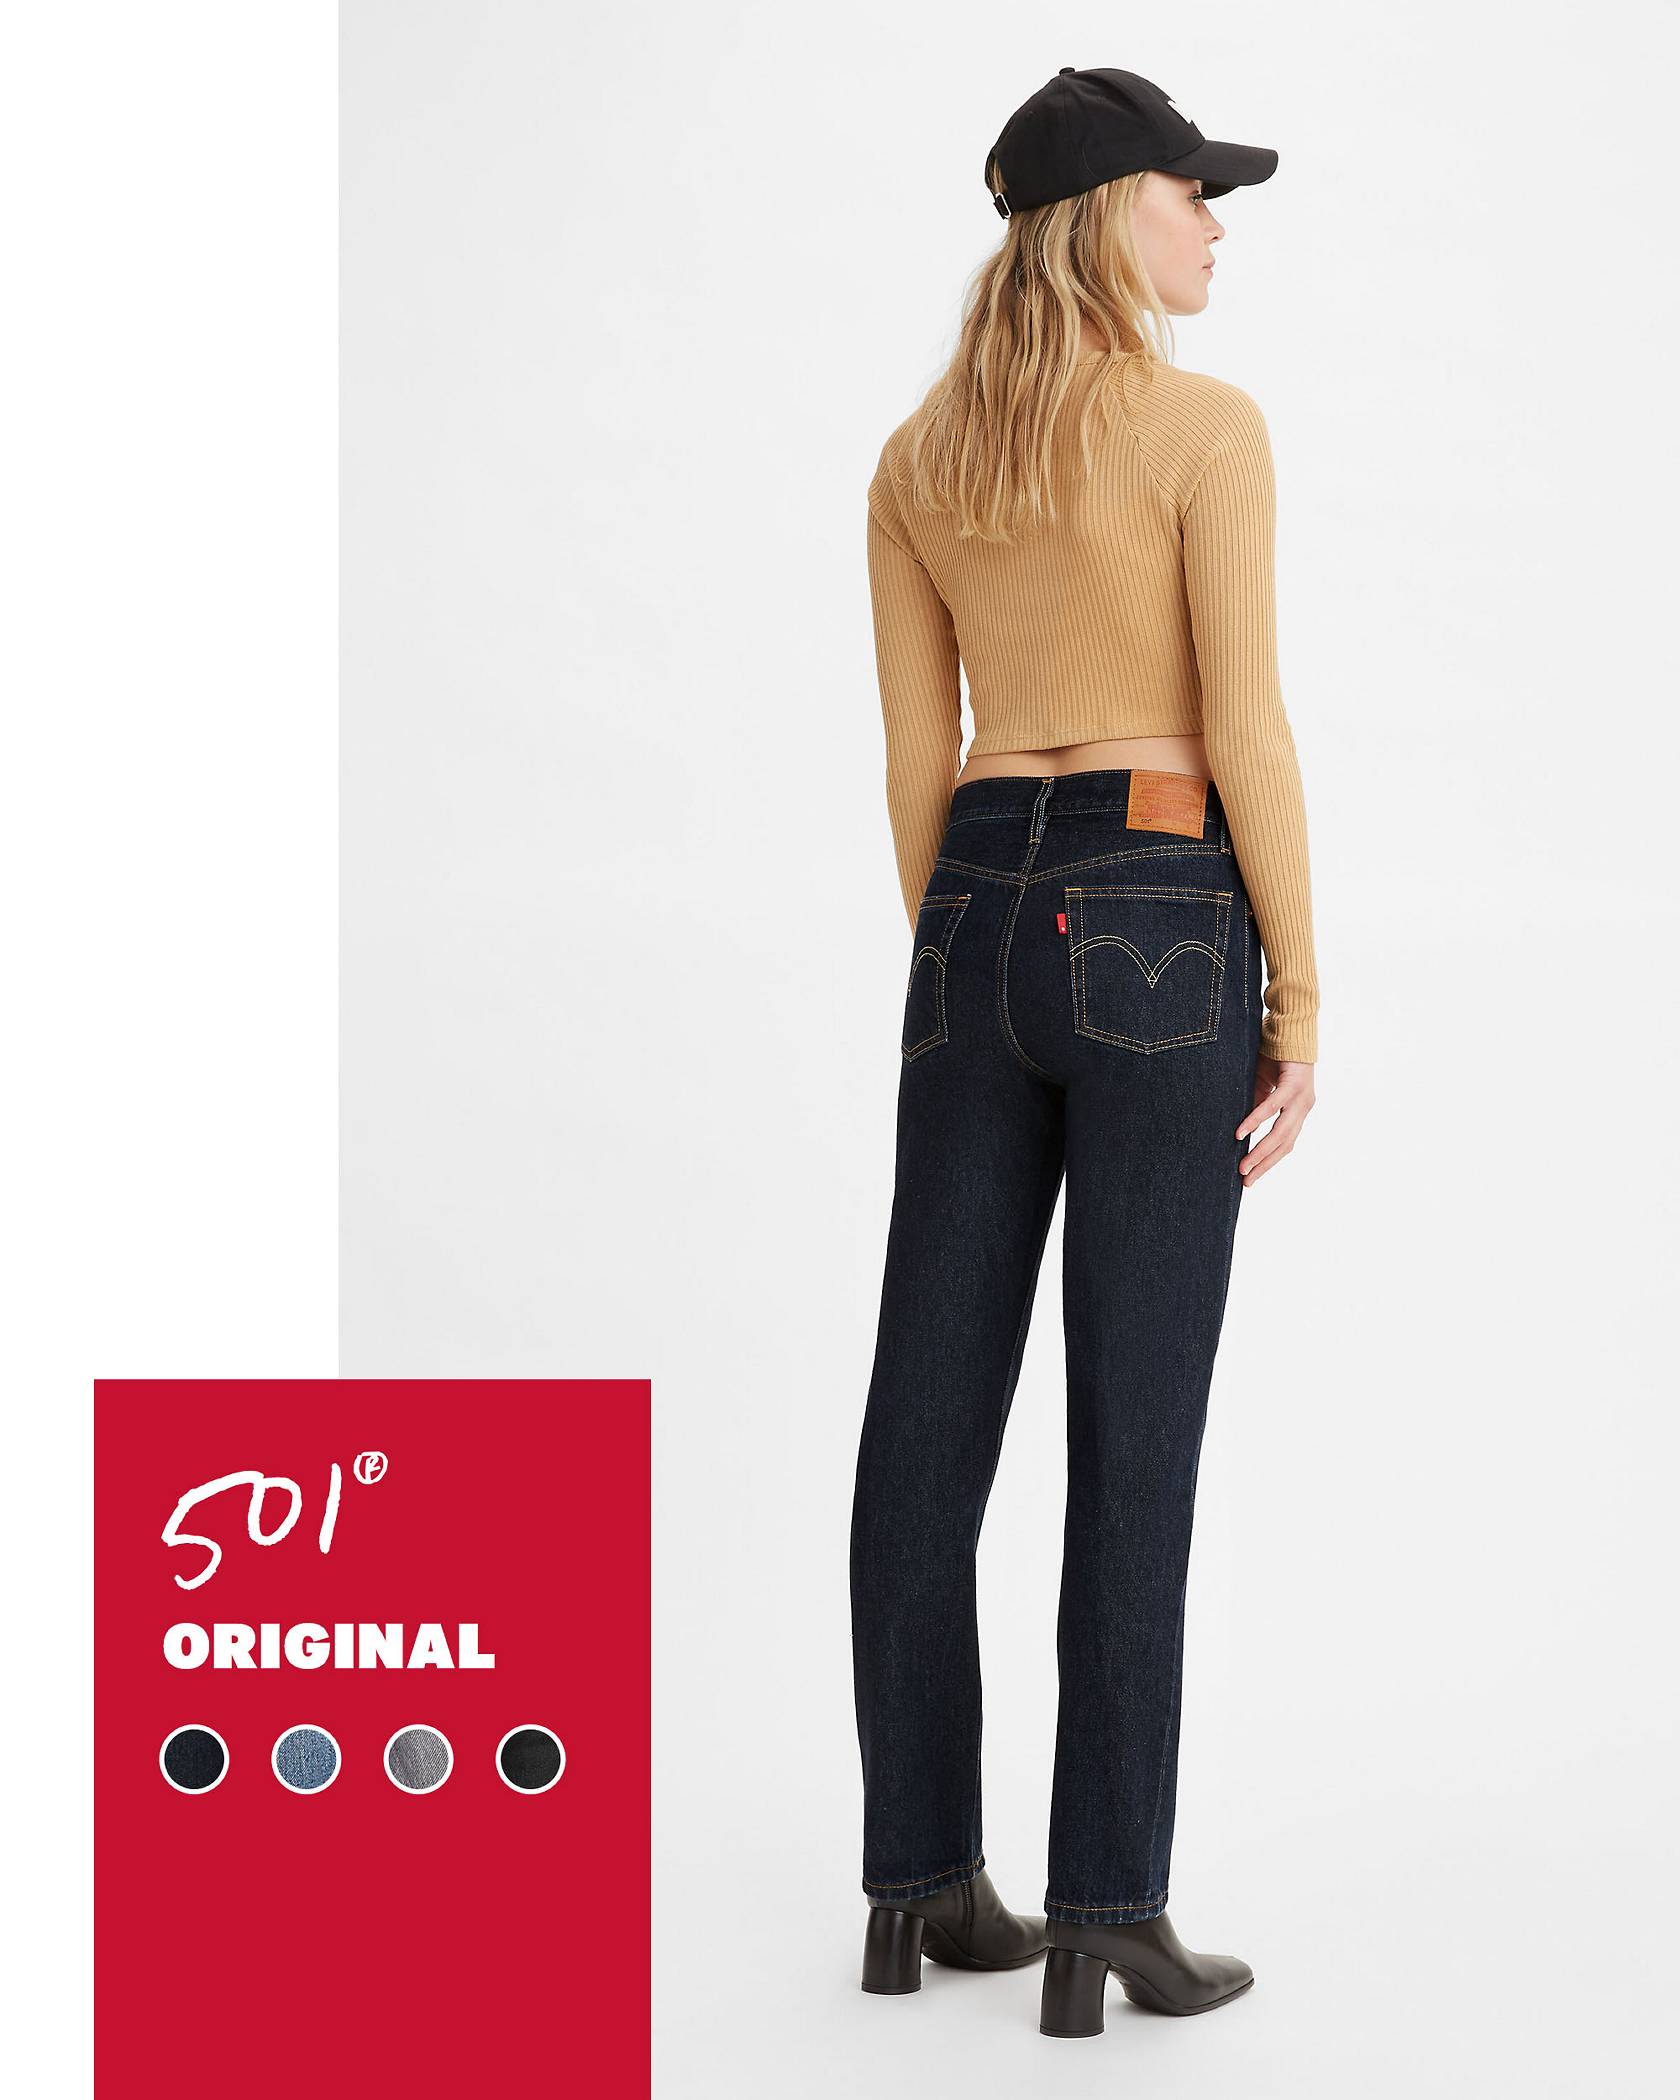 Paneled shot of model in dark wash 501® Original jeans with a red tag displaying product name and sample color swatches